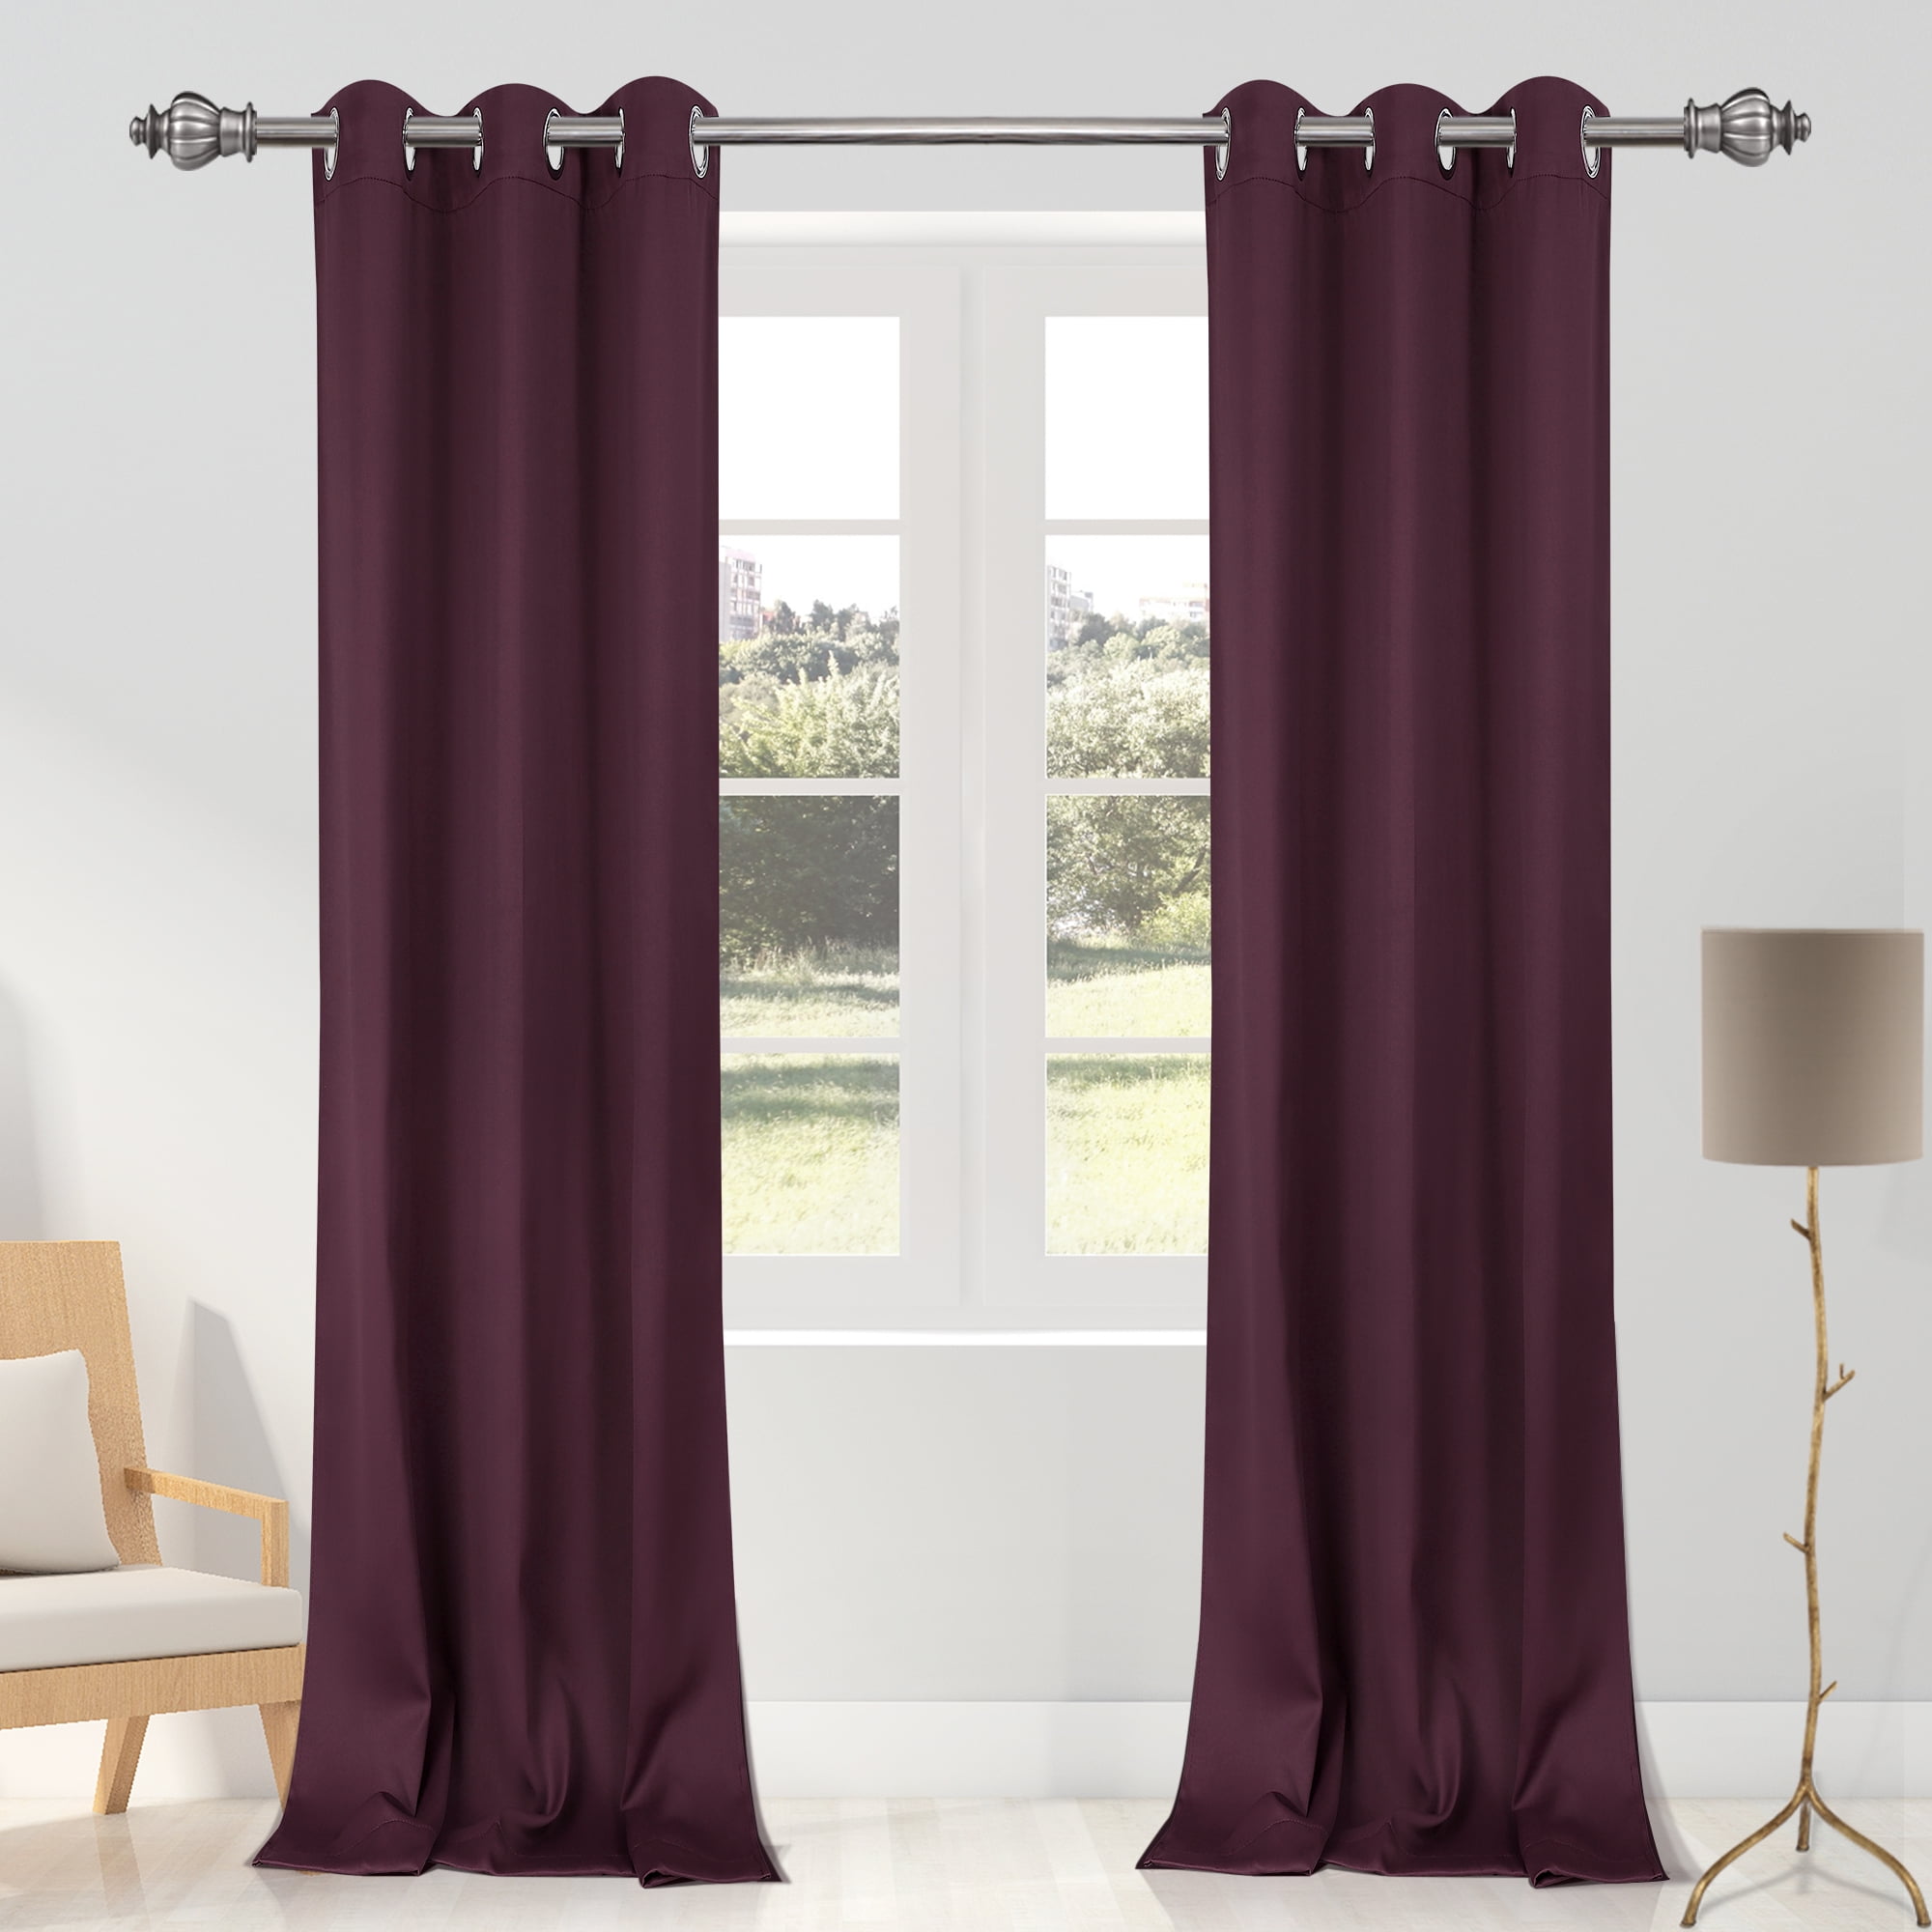 1 BURGUNDY PANEL THERMAL LINED BLACKOUT GROMMET WINDOW CURTAIN K32 95"